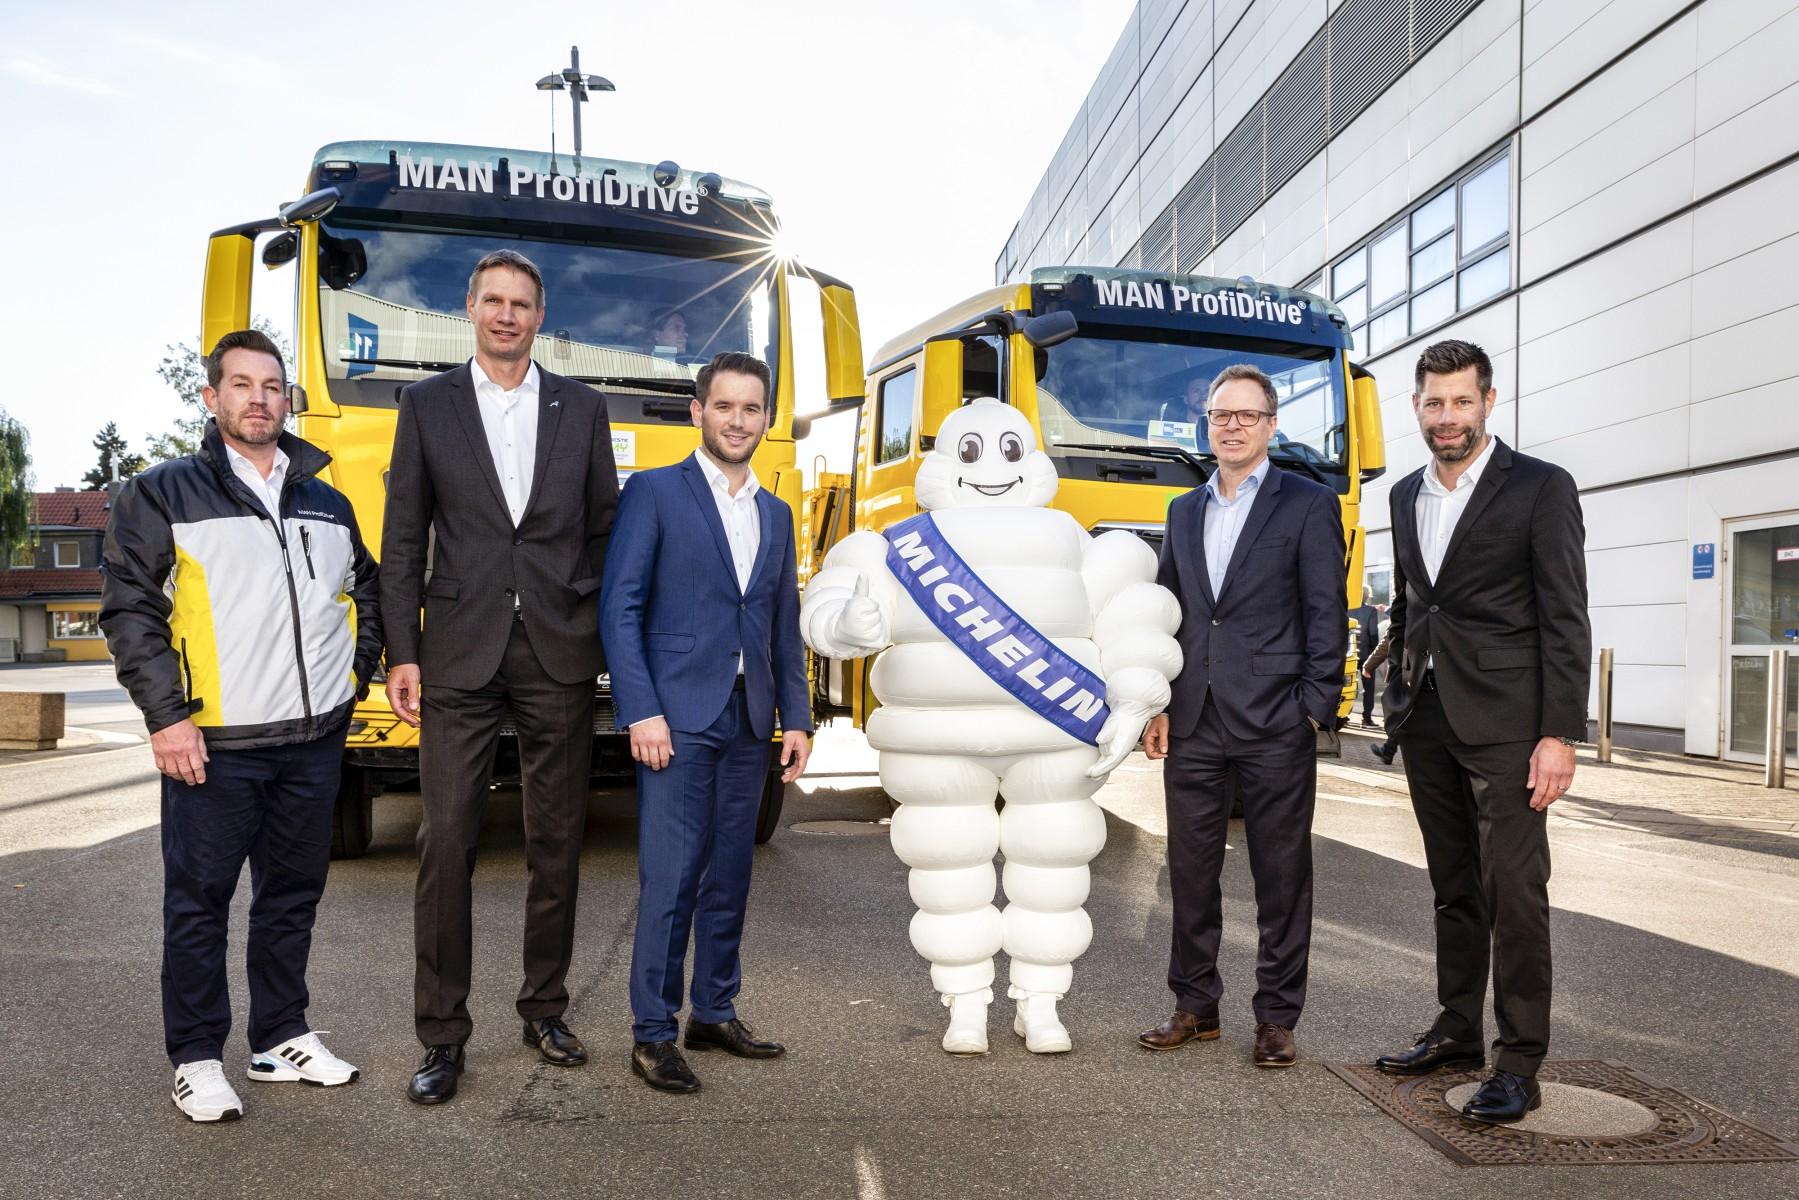 NJC.© - Tyres for MAN ProfiDrive: Michelin becomes global tyre partner of MAN Truck & Bus Driver Training